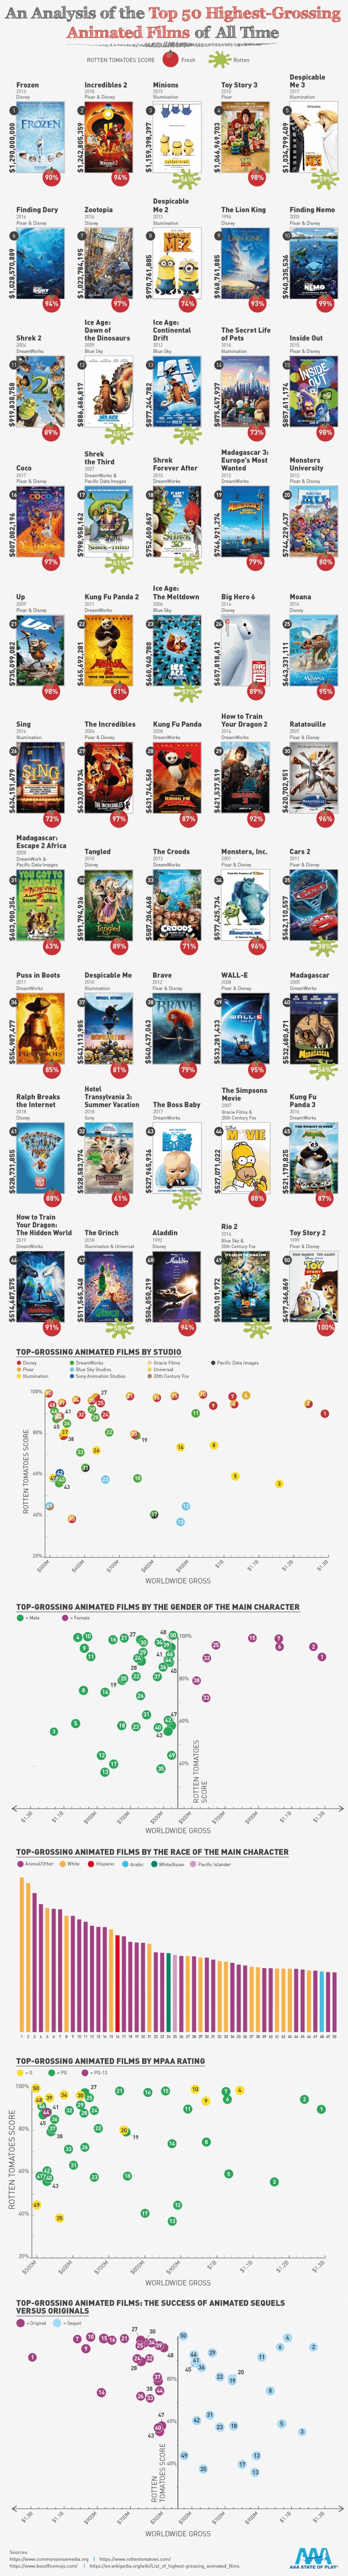 An Analysis of The Top 50 Highest-Grossing Animated Films Of All Time